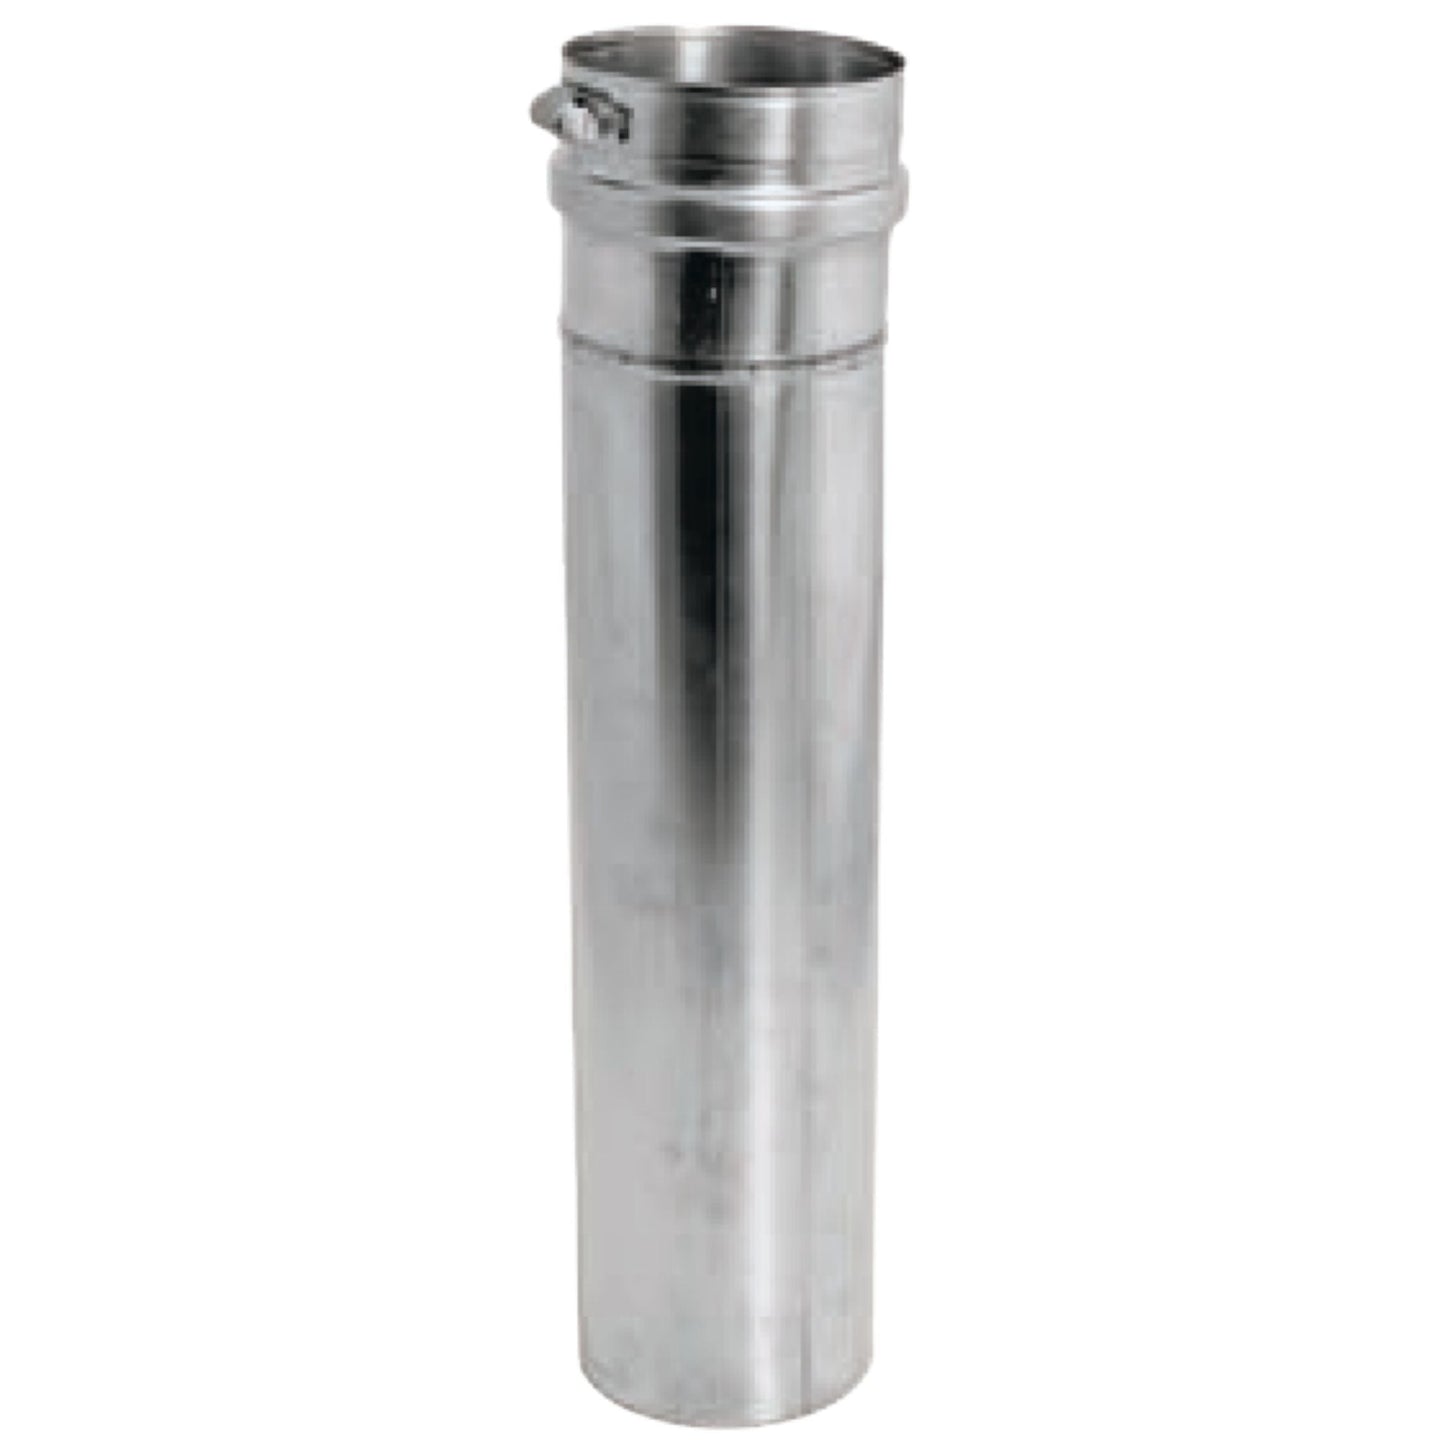 DuraVent FasNSeal 12" 2 Degree 316L Stainless Steel Adjustable Vent Length